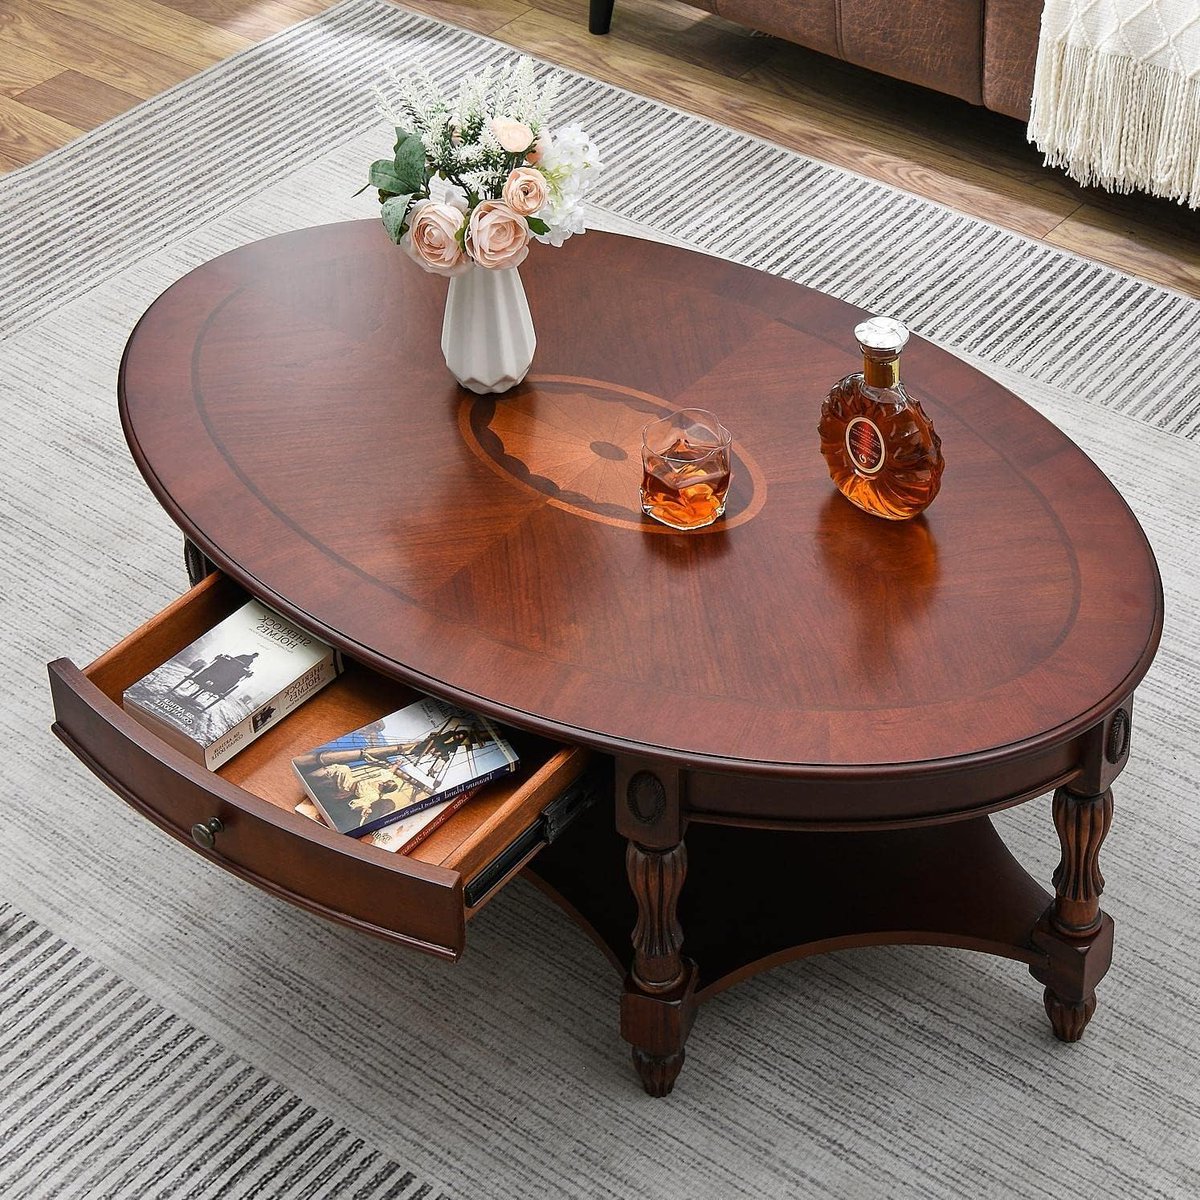 Red Oak Coffee Table 2023: Buyer's Guide And Recommendations wildriverreview.com/red-oak-coffee… #RedOakFurniture #HandcraftedTable #NaturalWood #Woodworking #OakCoffeeTable #RusticHome #LivingRoomDecor #UniqueFurniture